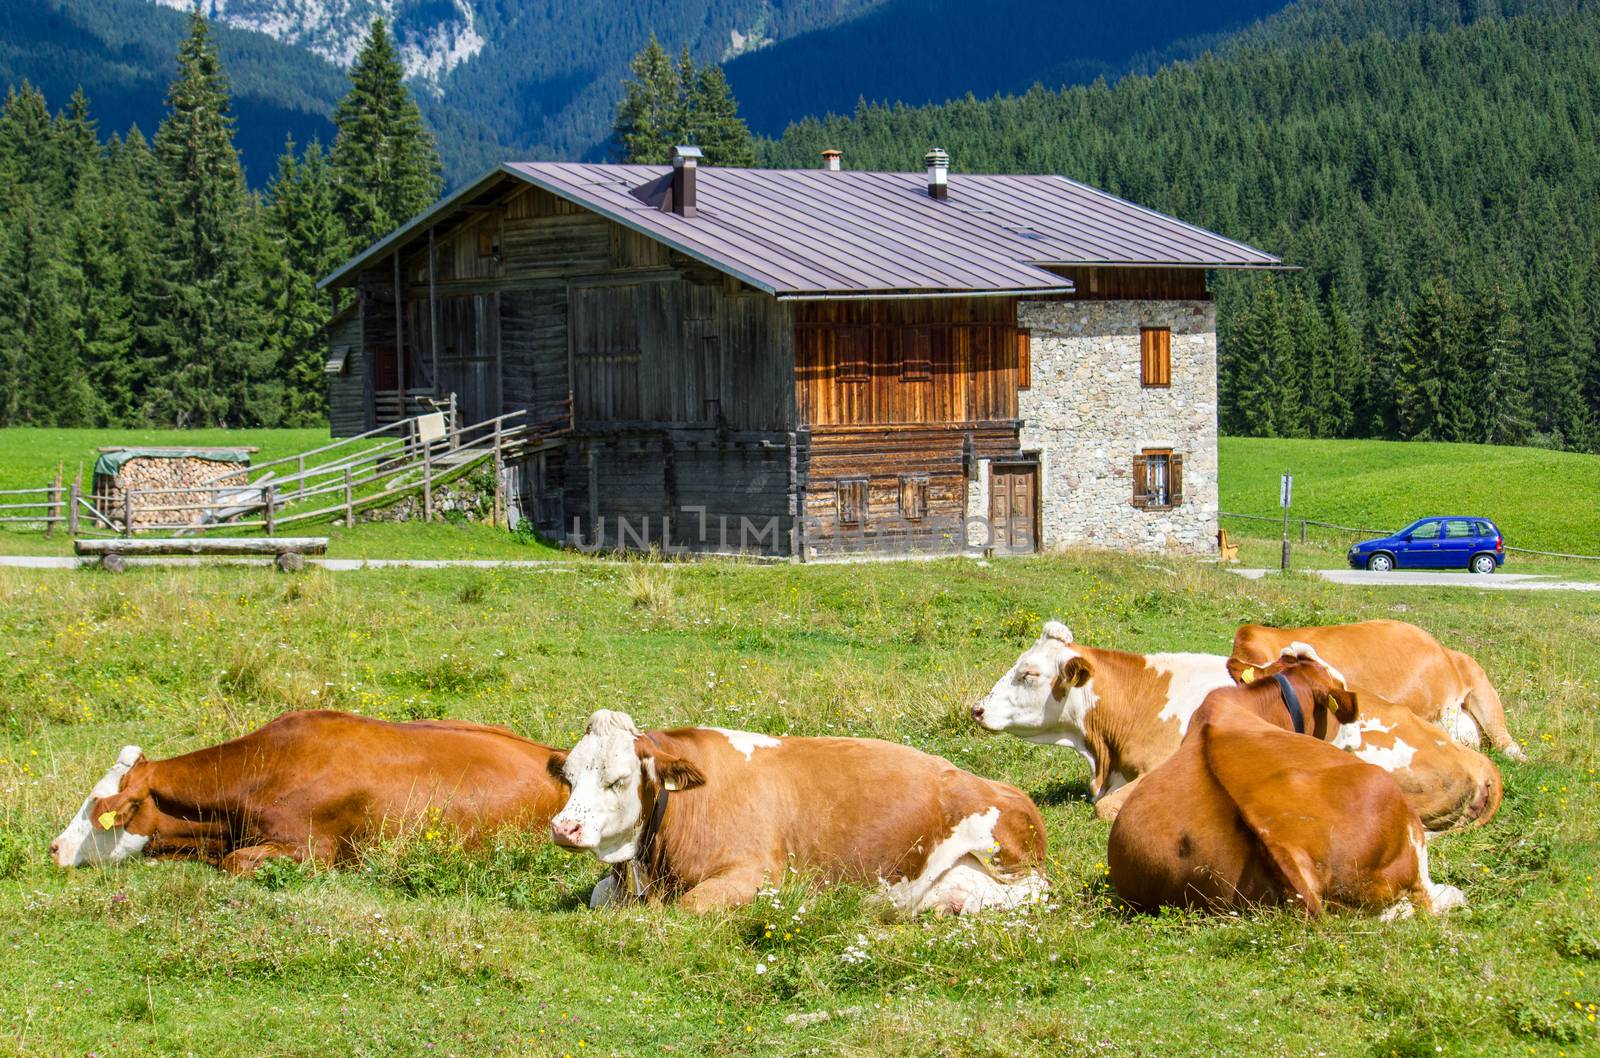 Cows grazing on a green summer meadow with hut in background by jovannig